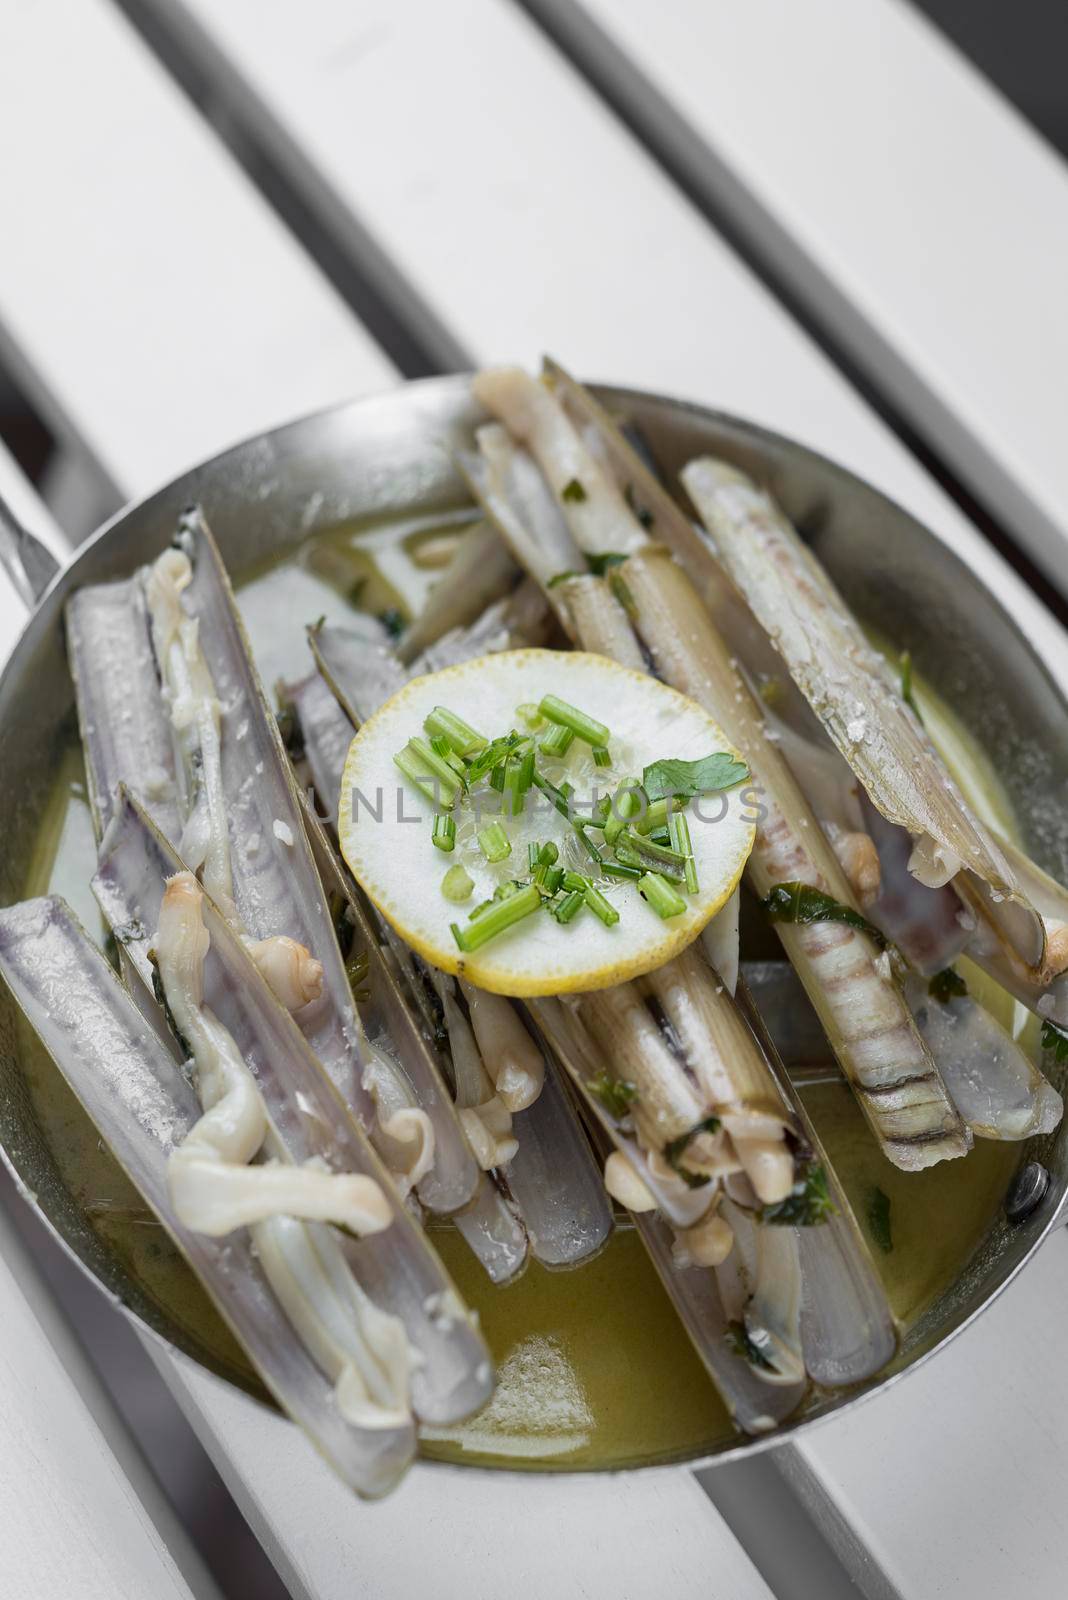 razor clams sauteed with garlic butter white wine in spain by jackmalipan